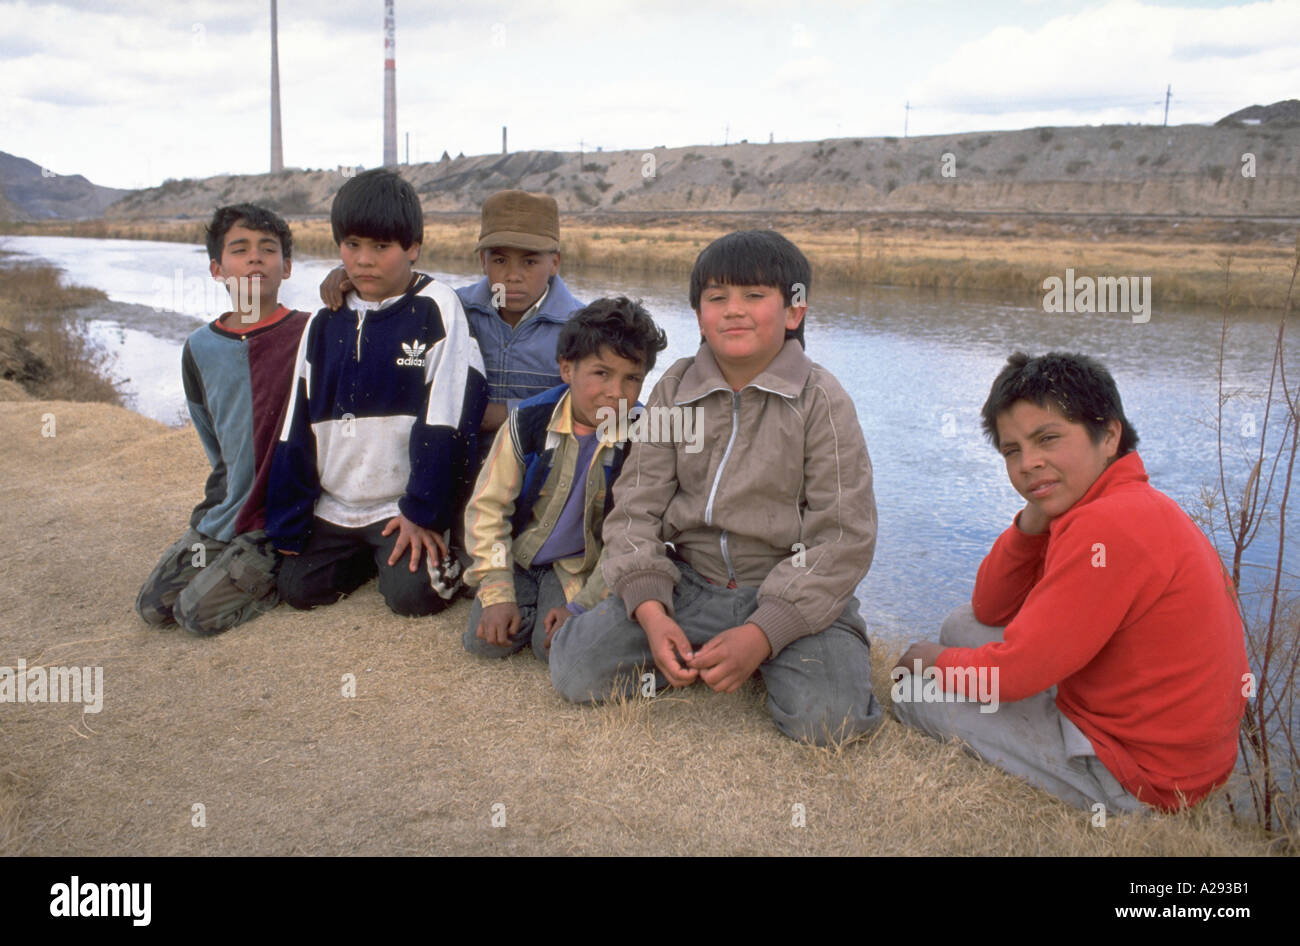 Six boys pose on the bank of the Rio Grande River in Ciudad Juarez Mexico with El Paso Texas USA in the background Stock Photo